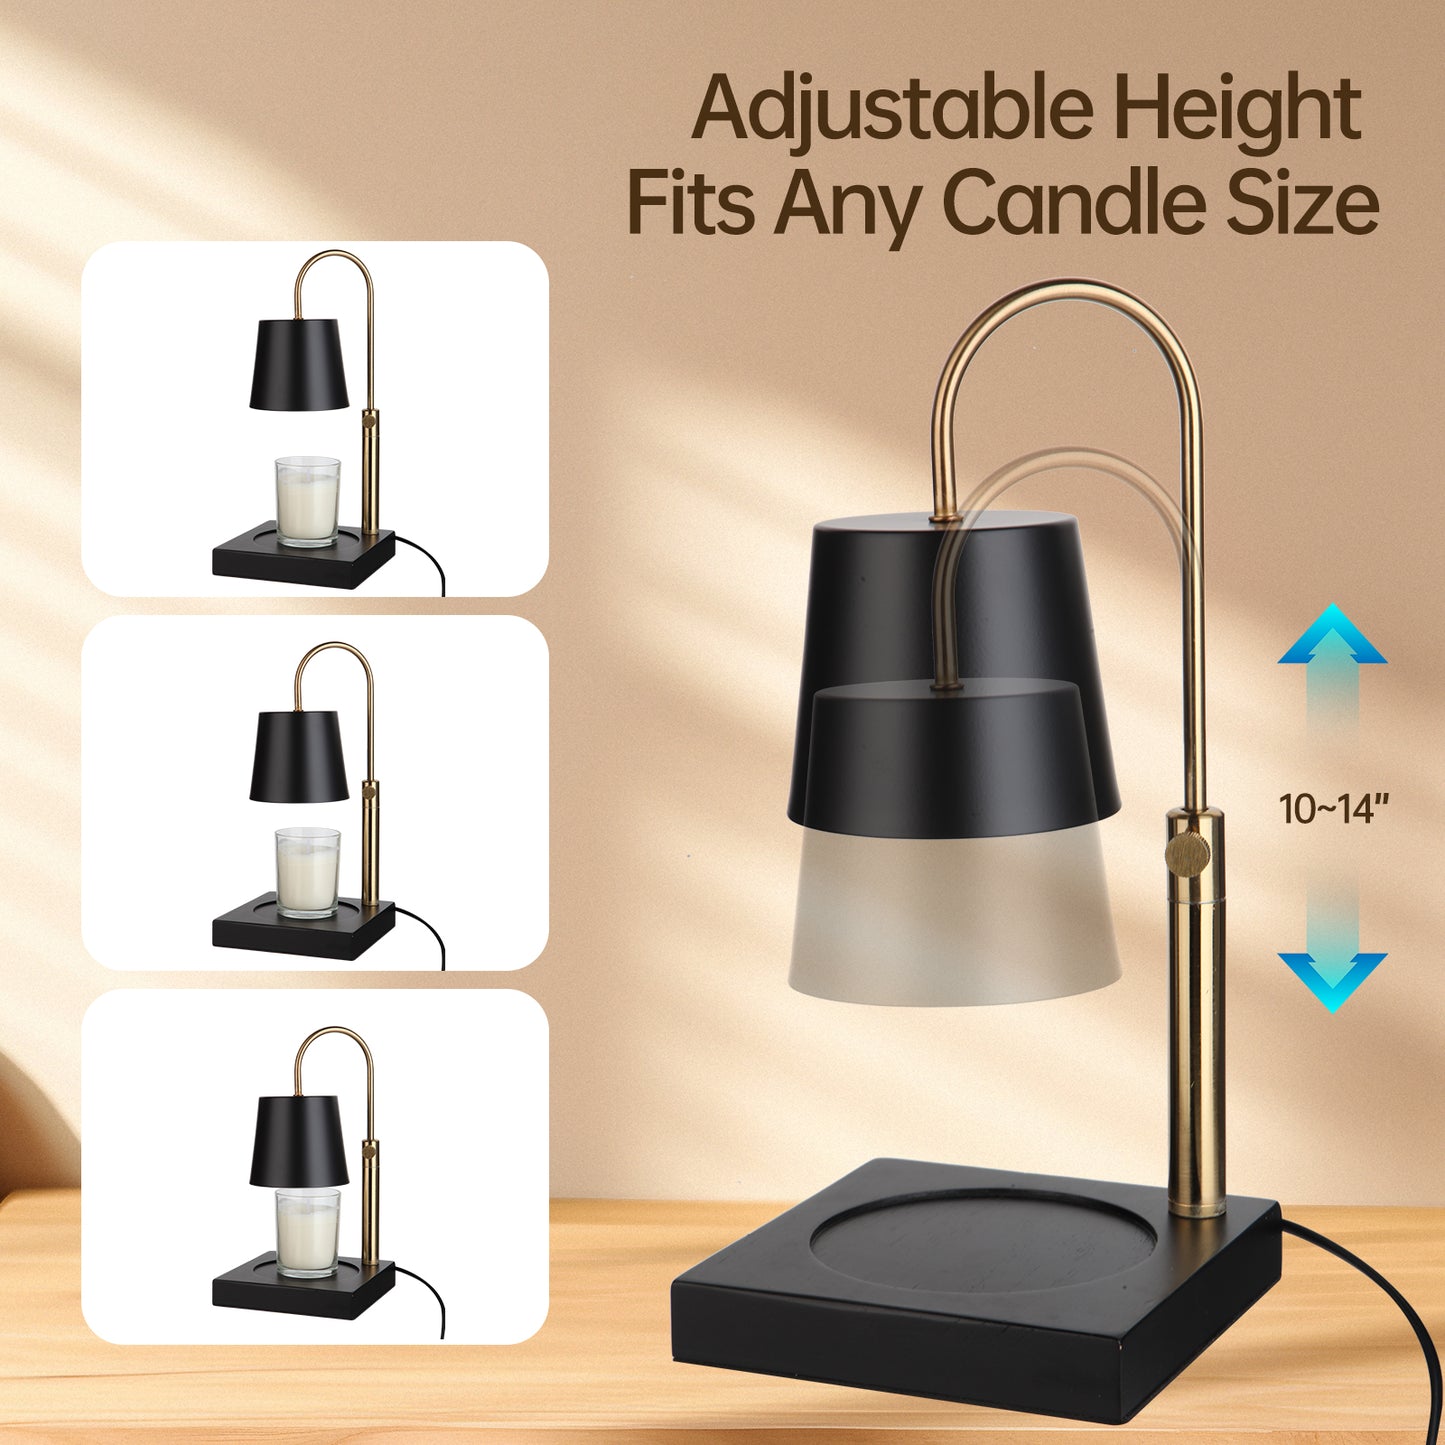 ZEMIRO CHARGE Candle Warmer Lamp Timer/Dimmer, Adjustable Height, Wood Base Electric Top Down Melting Wax Melter for Jar Candles, Home Decor Gift (2 x GU10 Bulbs Included)